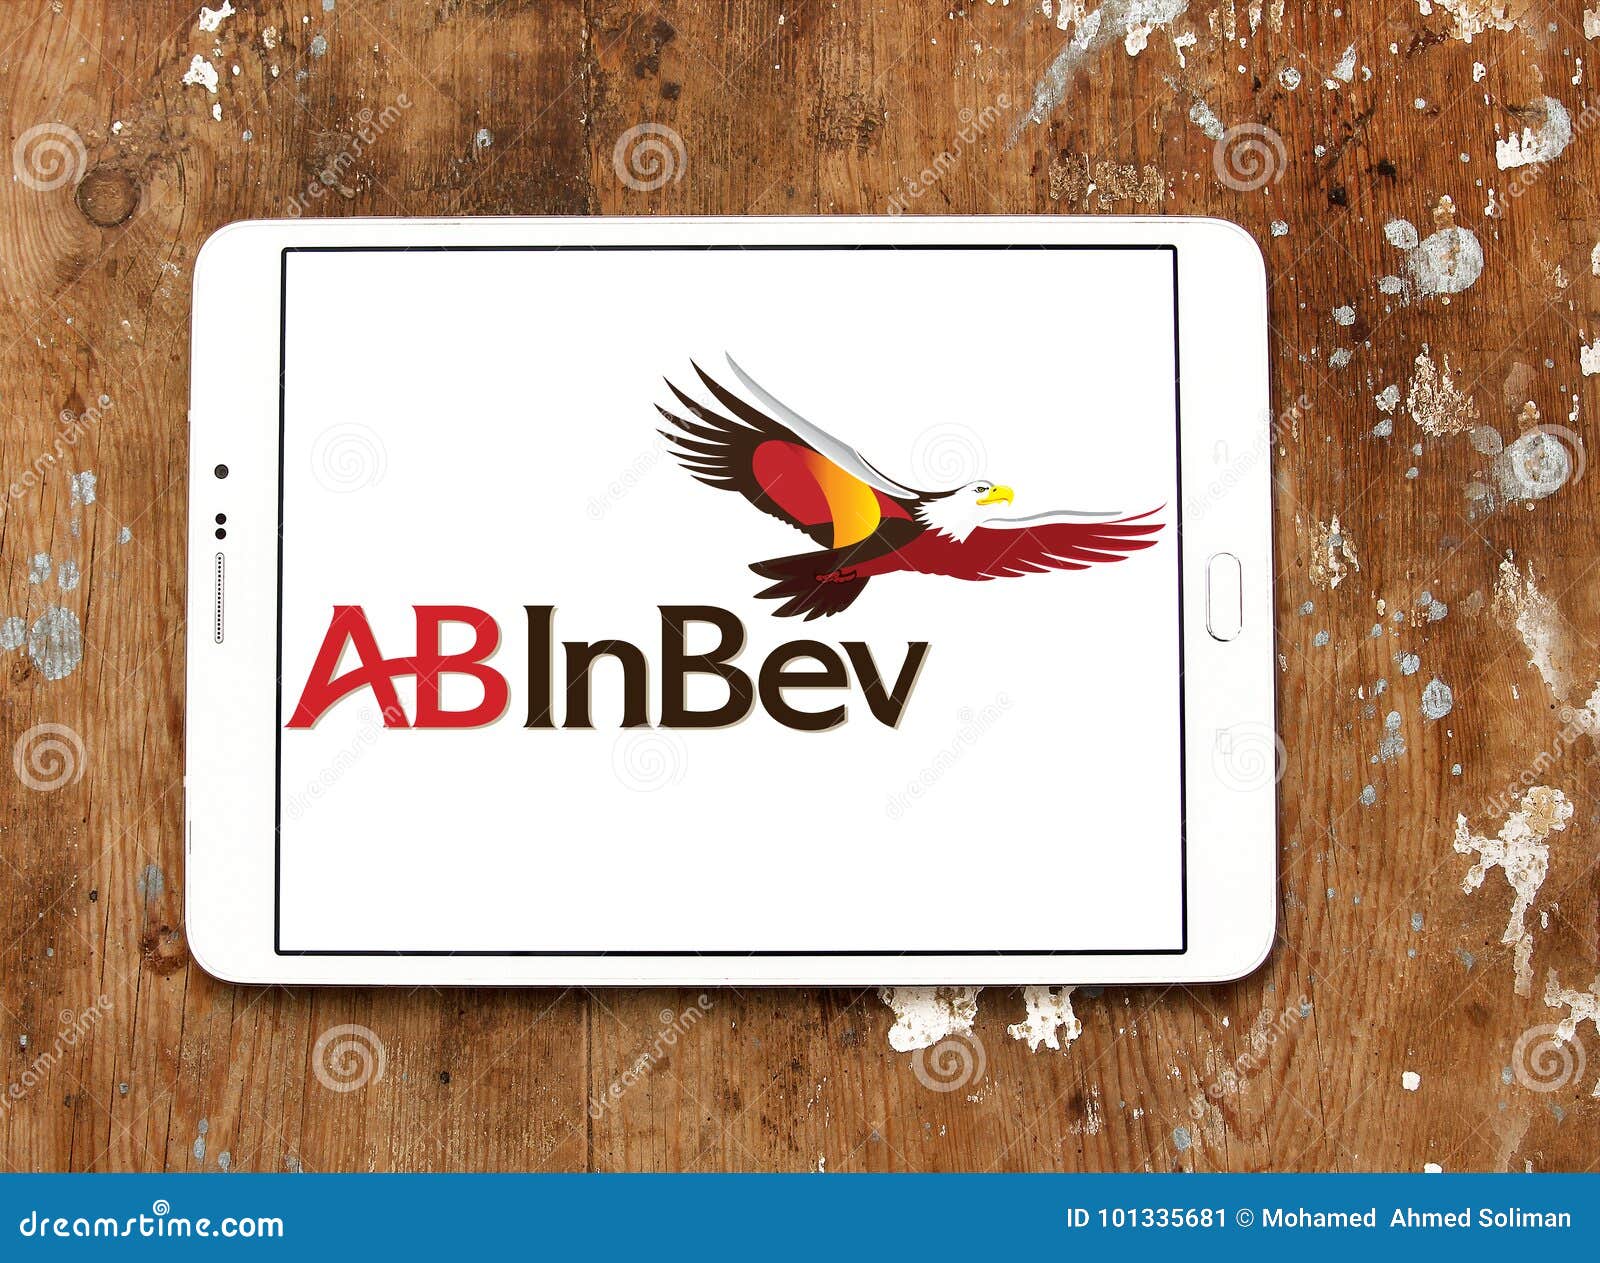 Ab Inbev Beer Company Logo Editorial Photo Image Of Commercial